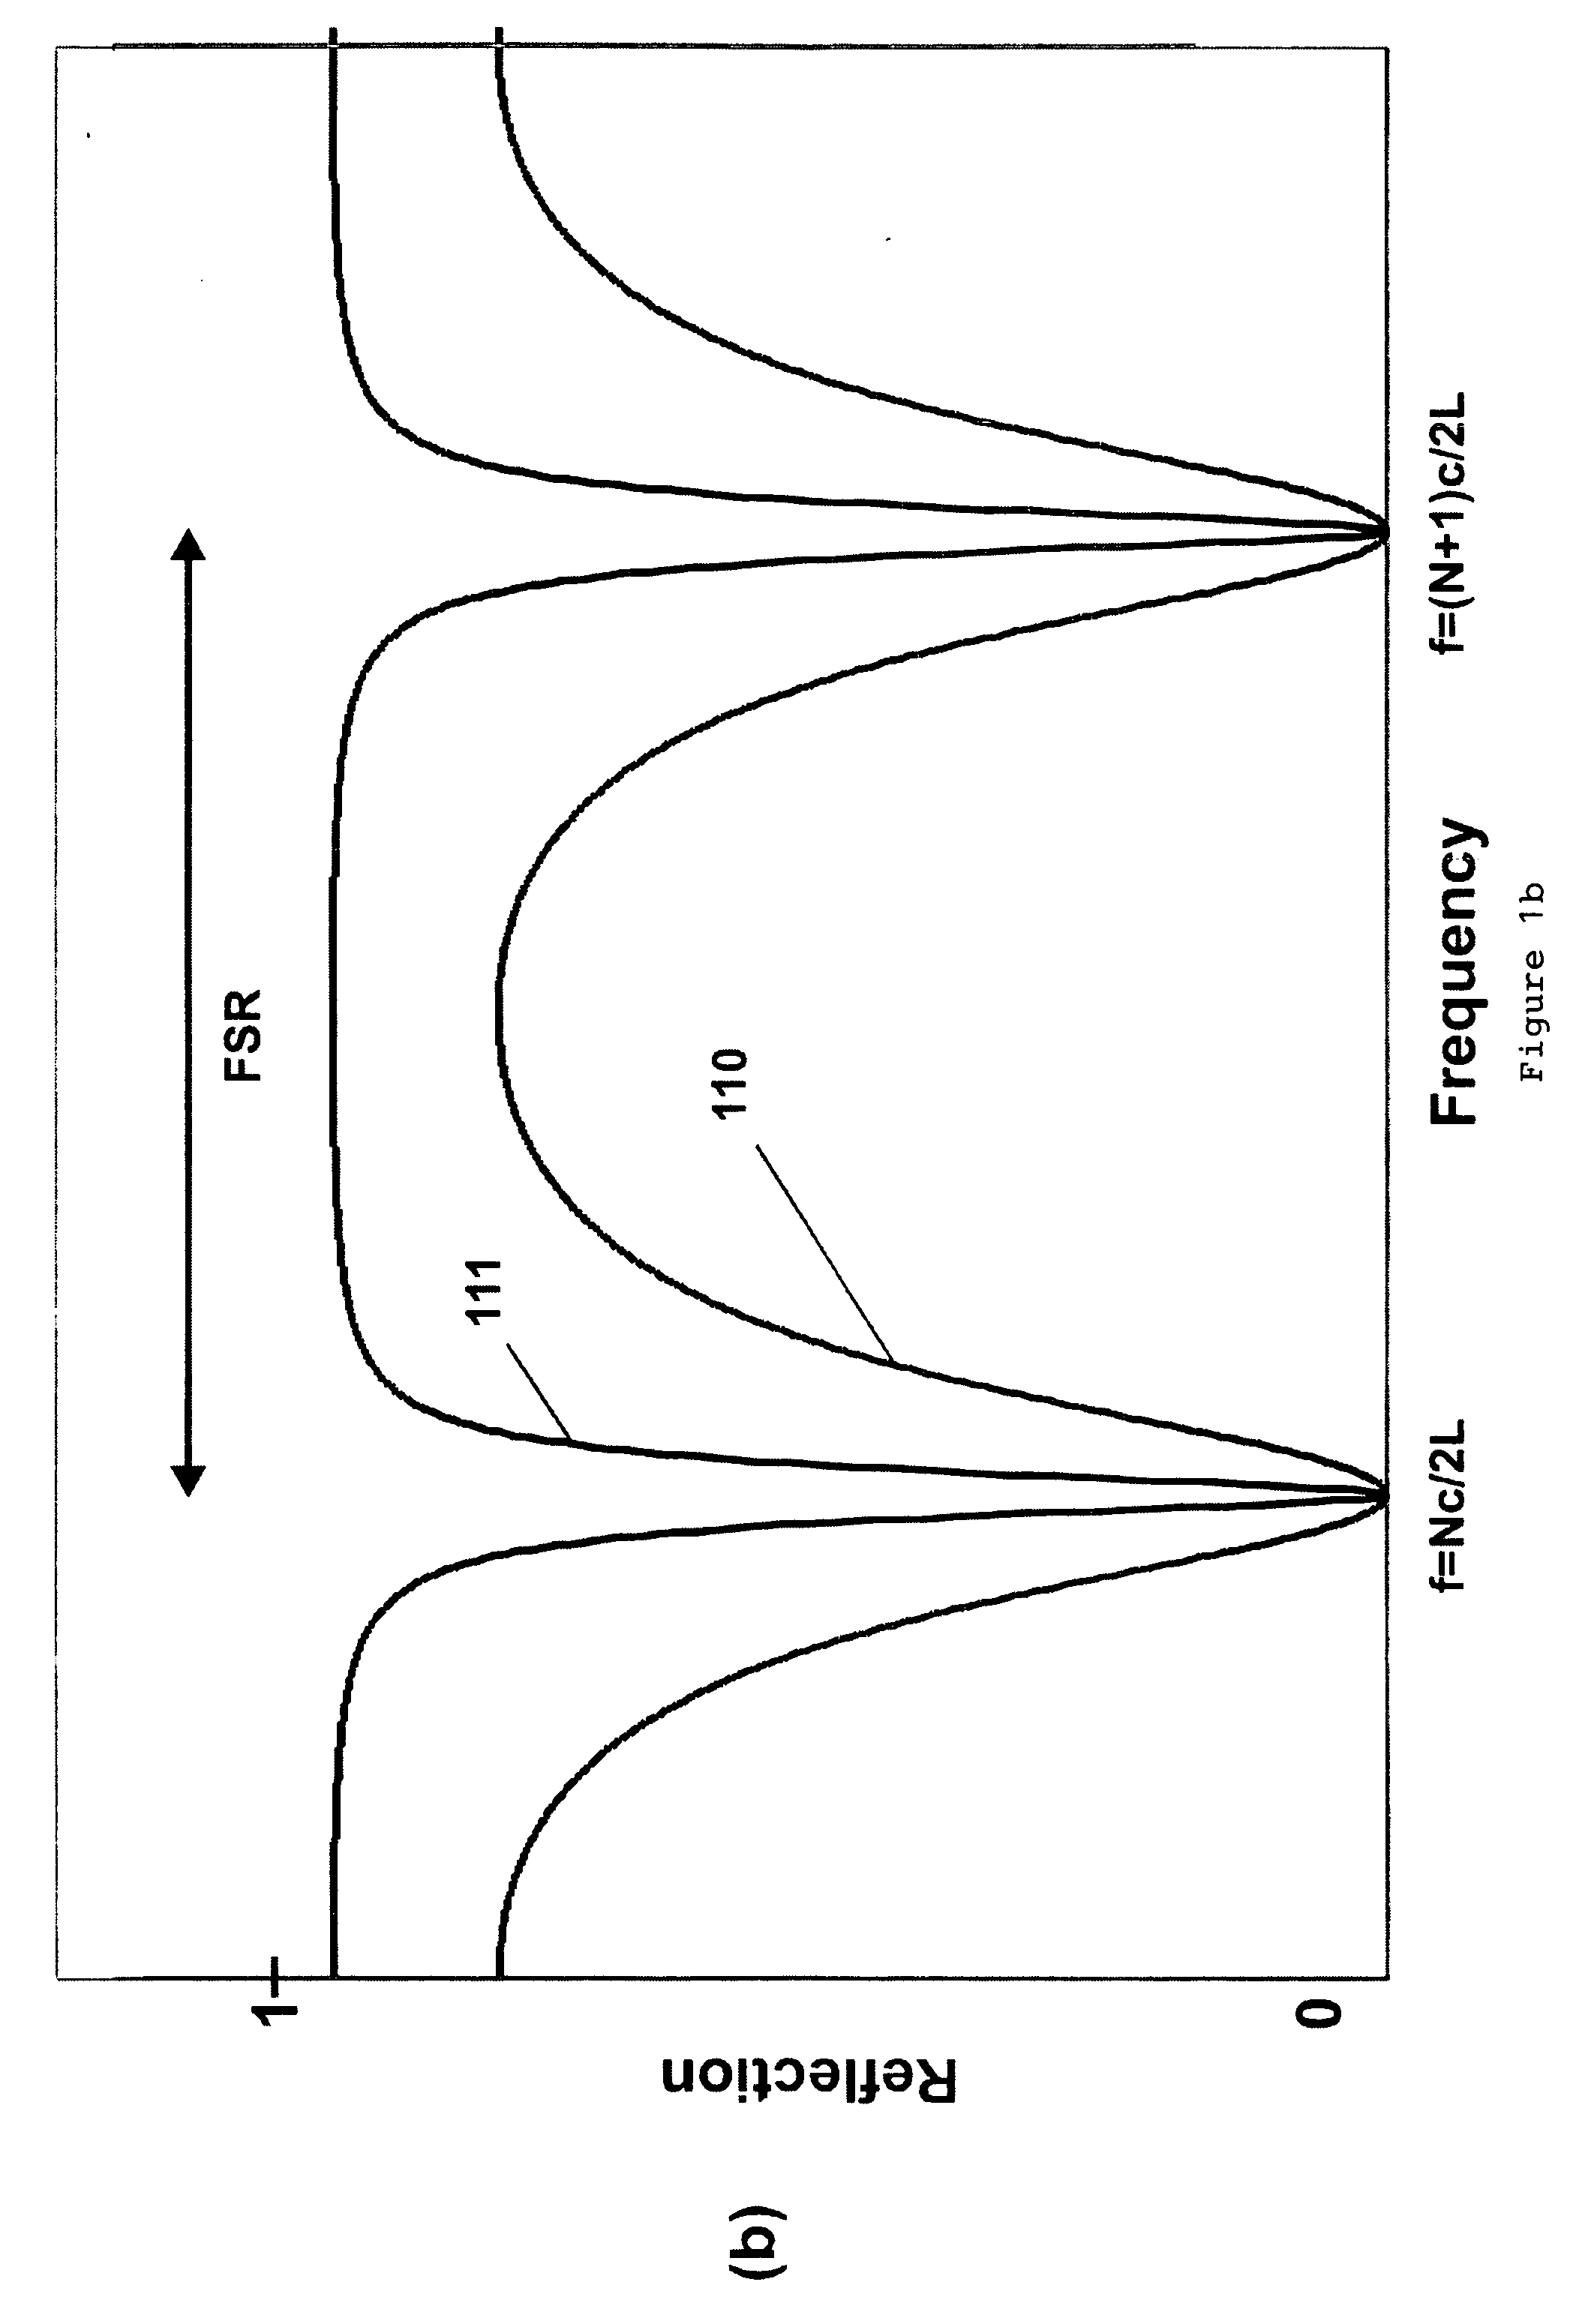 Apparatus and method for stabilizing lasers using dual etalons